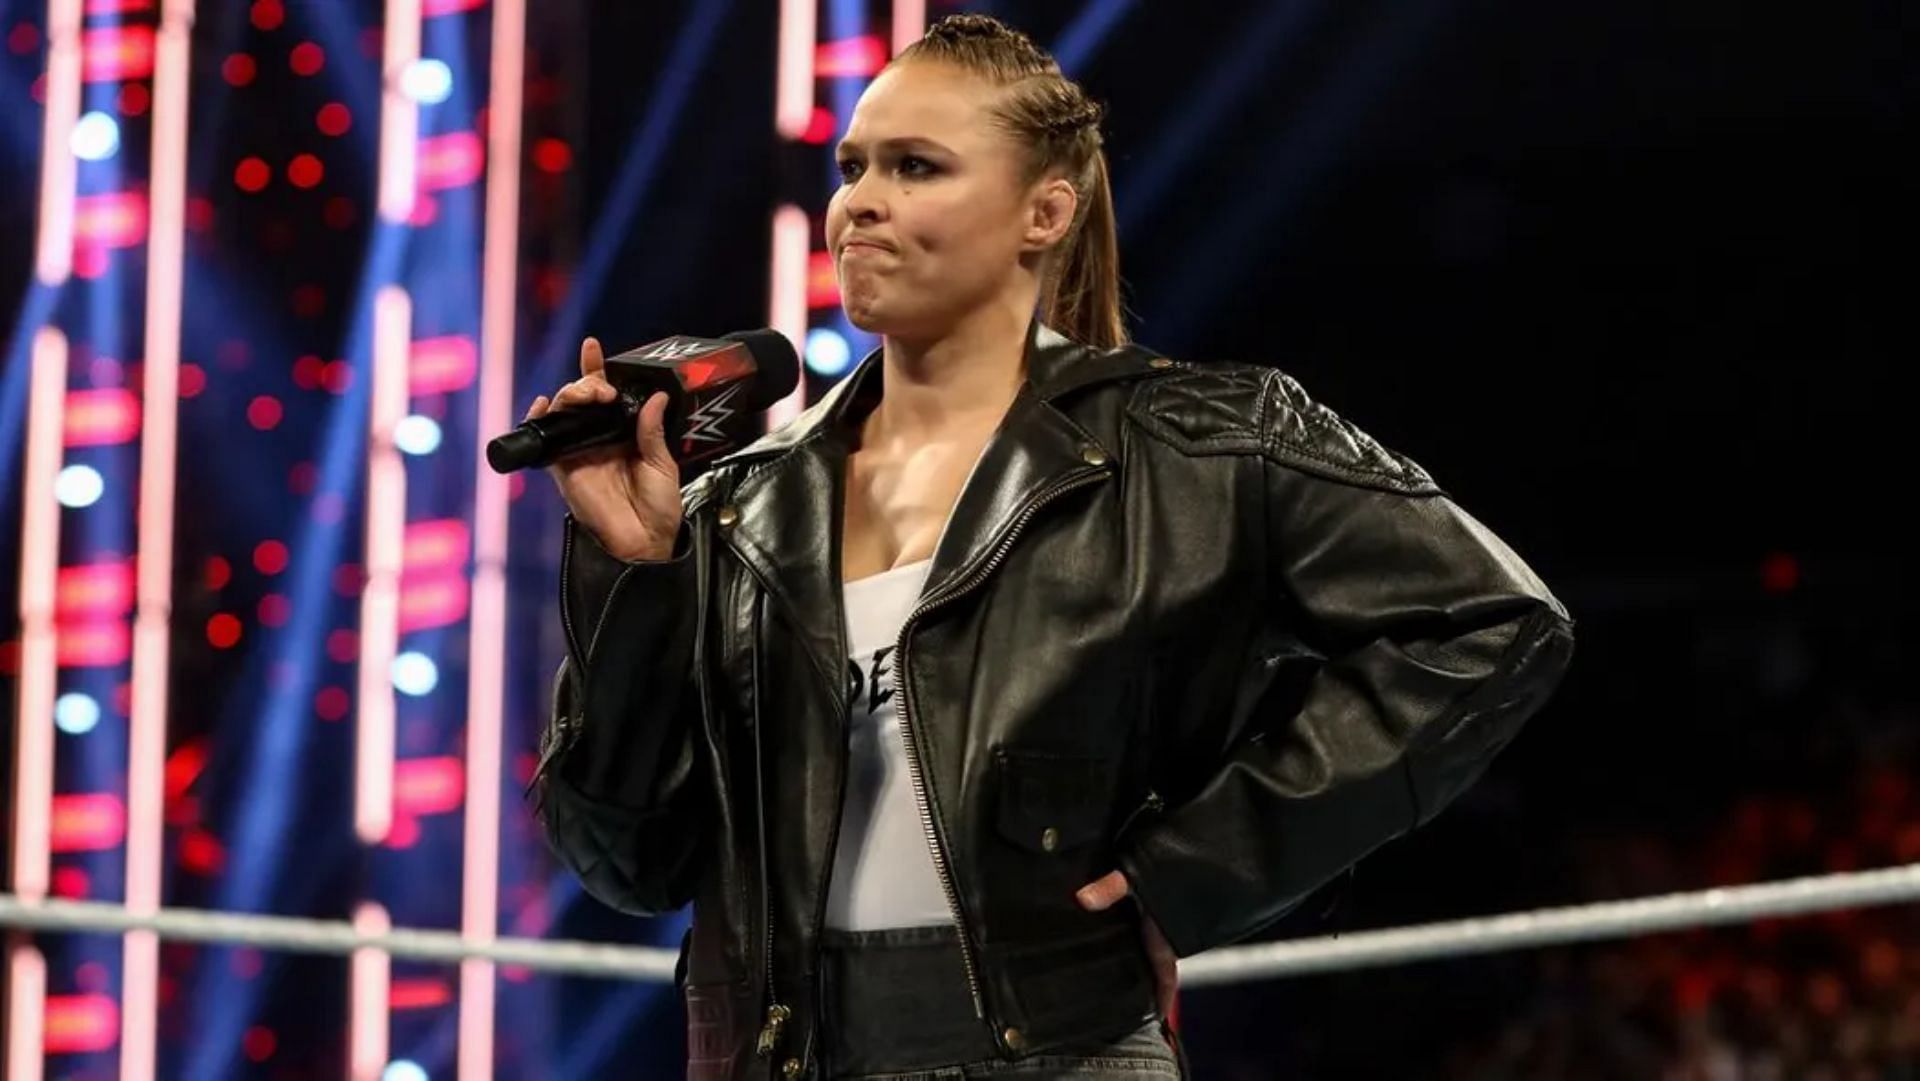 Ronda Rousey lost at WrestleMania 38 to Charlotte Flair